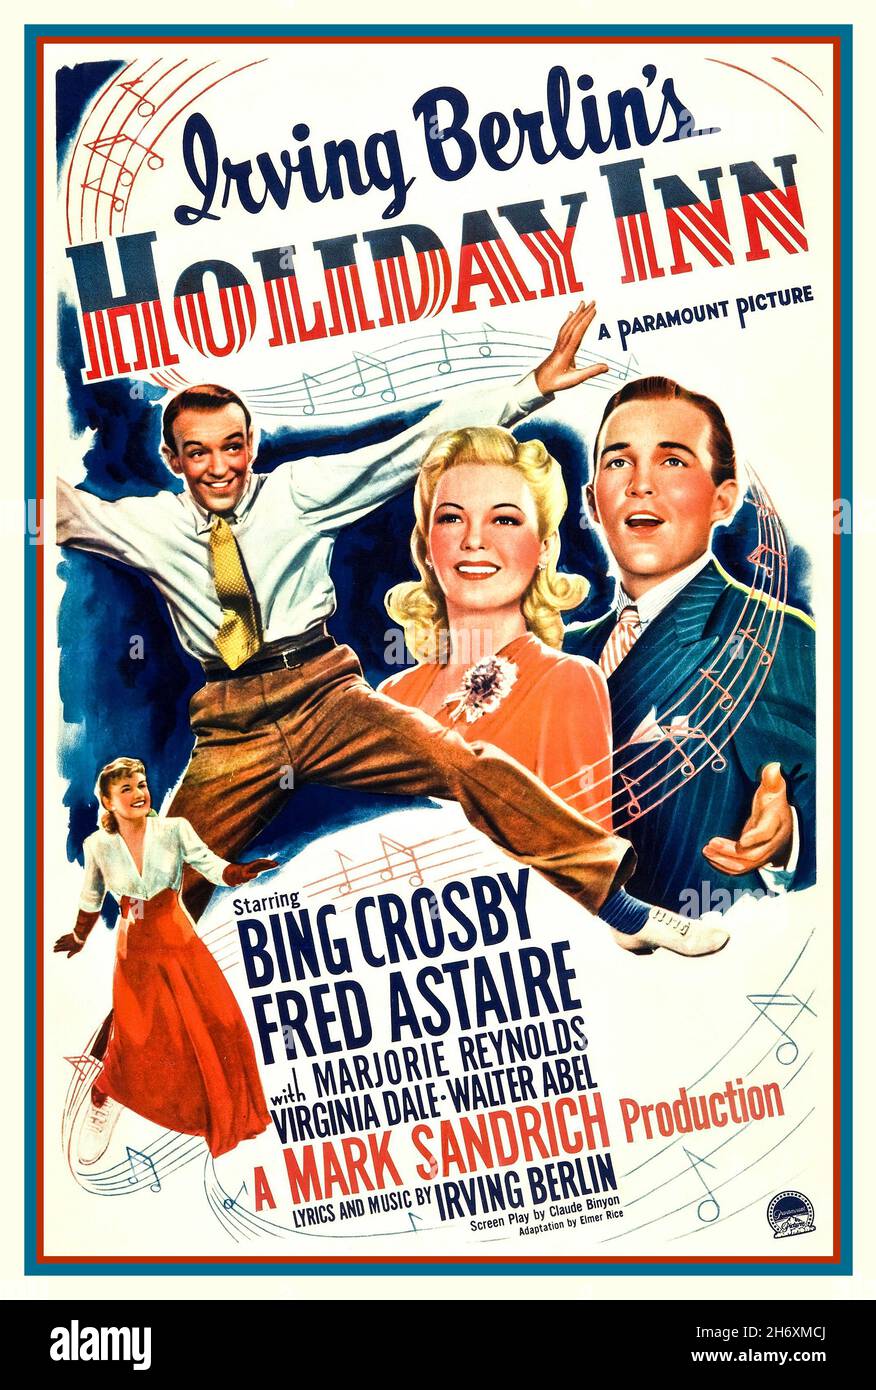 Vintage 1940s Movie Film Poster Holiday Inn a 1942 American musical film directed by Mark Sandrich and starring Bing Crosby and Fred Astaire, with Marjorie Reynolds, Virginia Dale, and Walter Abel. With music by Irving Berlin, the composer wrote twelve songs specifically for the film, the best known being "White Christmas". The film features a complete reuse of the song "Easter Parade", written by Berlin for the 1933 Broadway revue As Thousands Cheer. The film's choreography was by Danny Dare. The film received a 1943 Academy Award for Best Original Song (Irving Berlin for "White Christmas"), Stock Photo